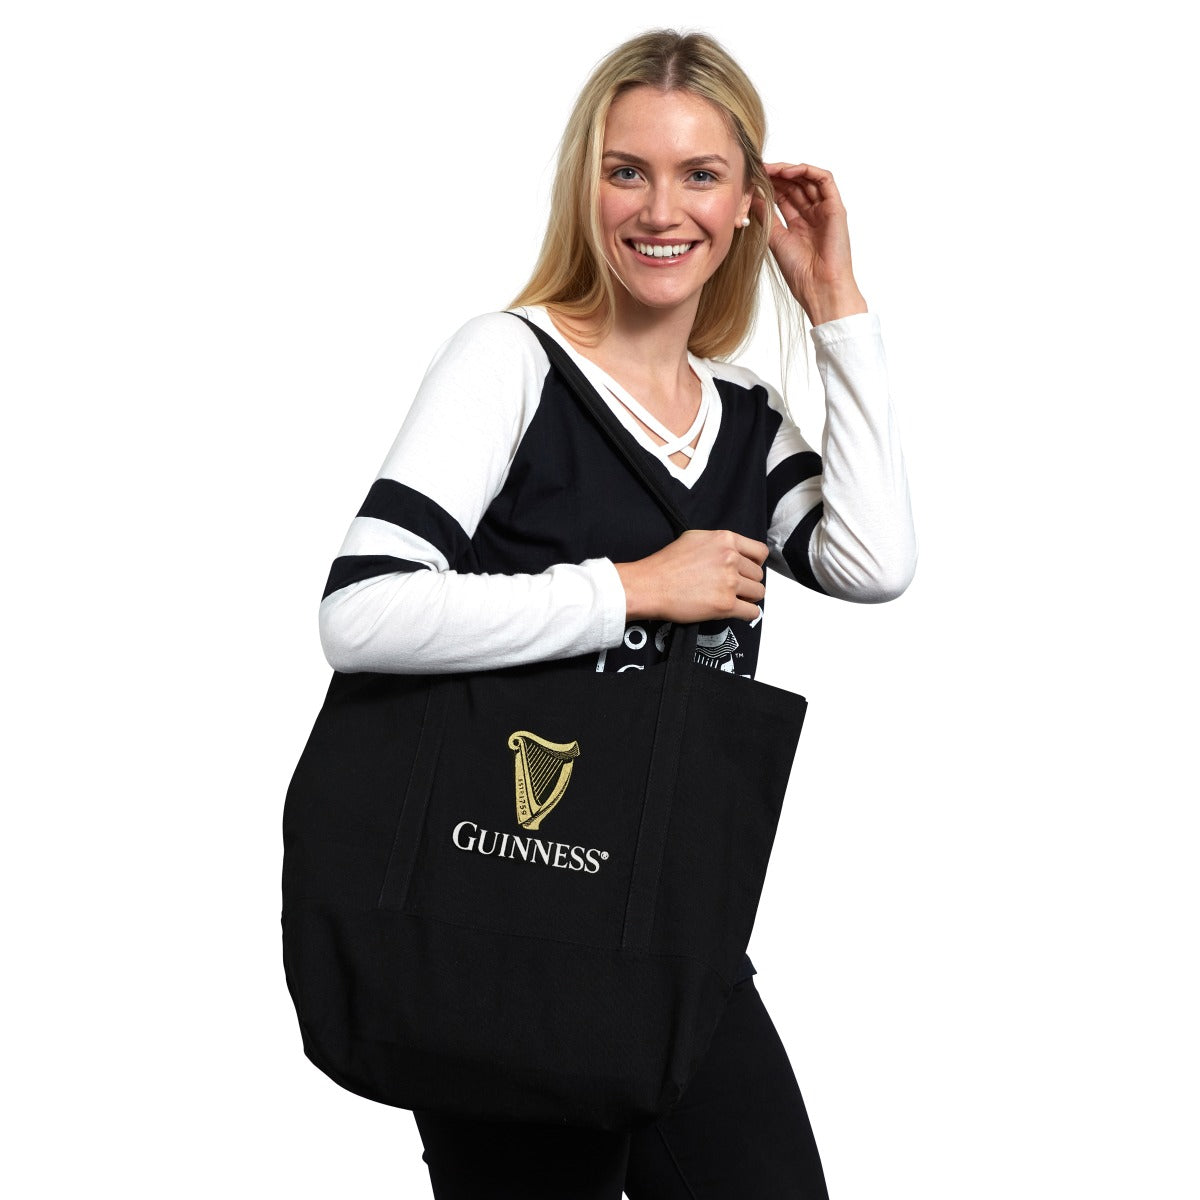 A woman shopping with a Guinness tote bag made of cotton canvas.